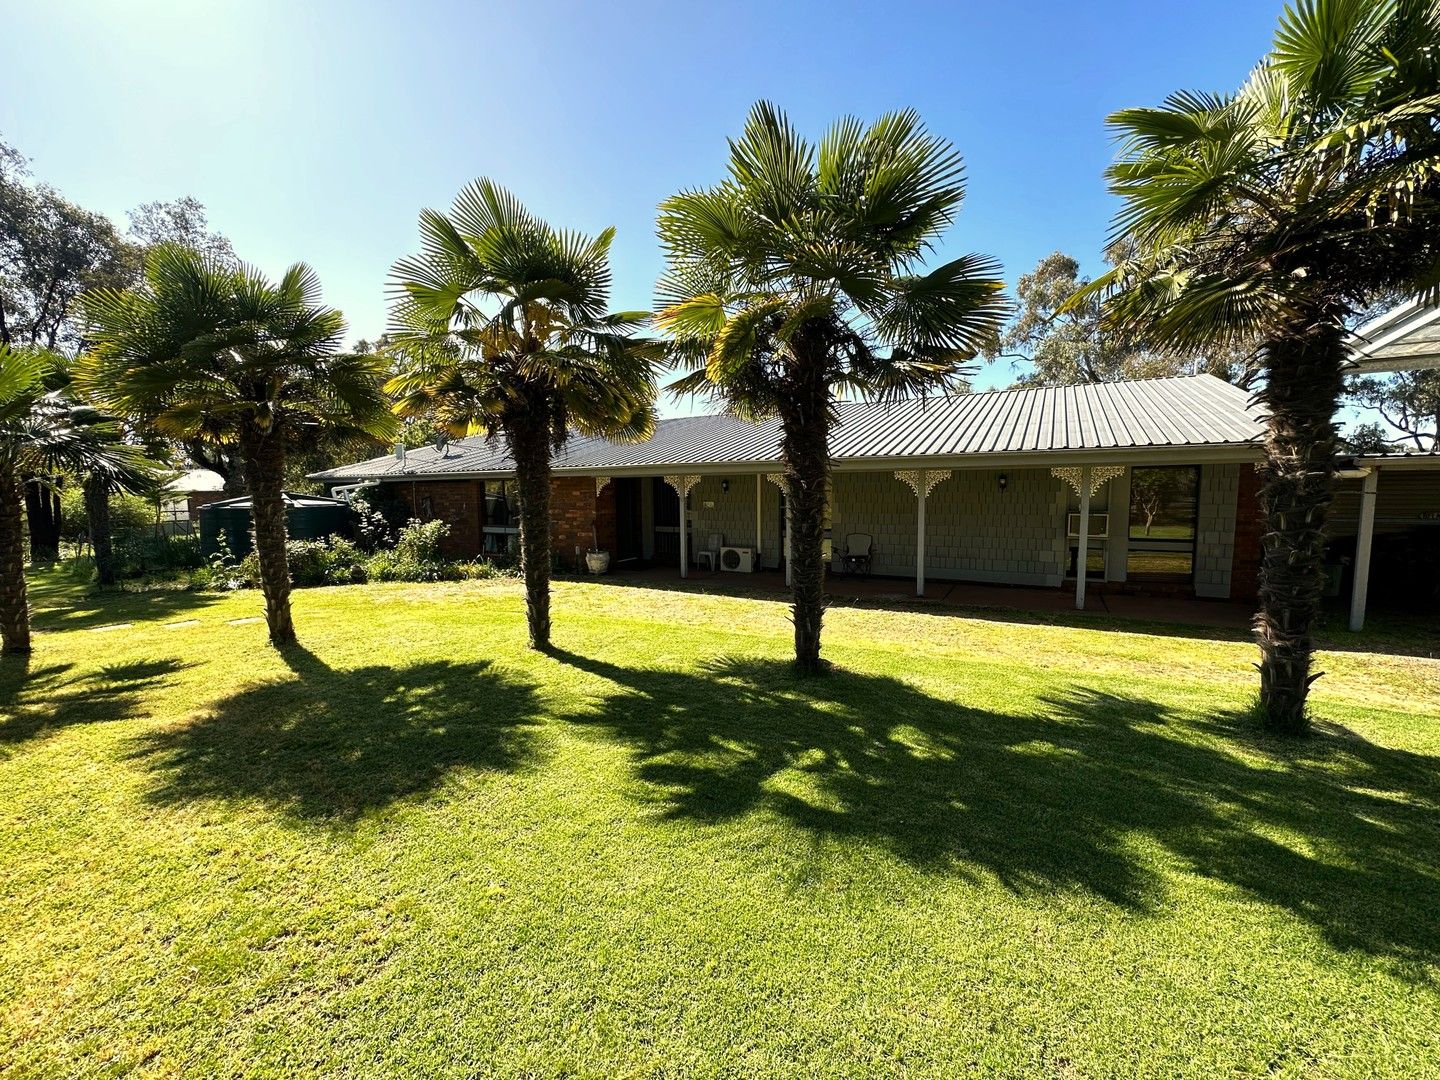 33 Hope Street, WOMBAT VIA, Young NSW 2594, Image 0